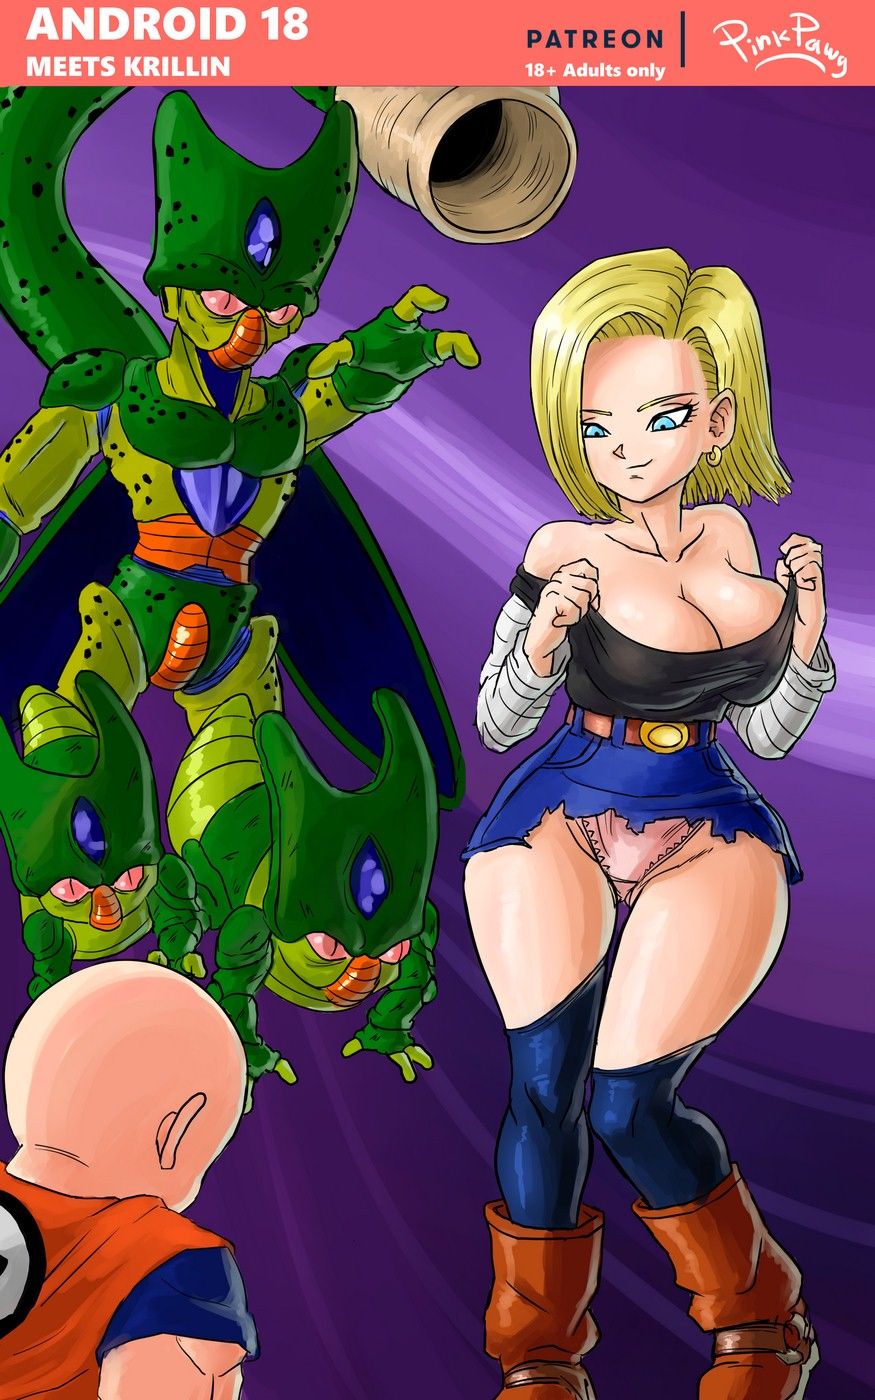 Android 18 meets Krillin (Dragon Ball Z) by Pink Pawg page 1